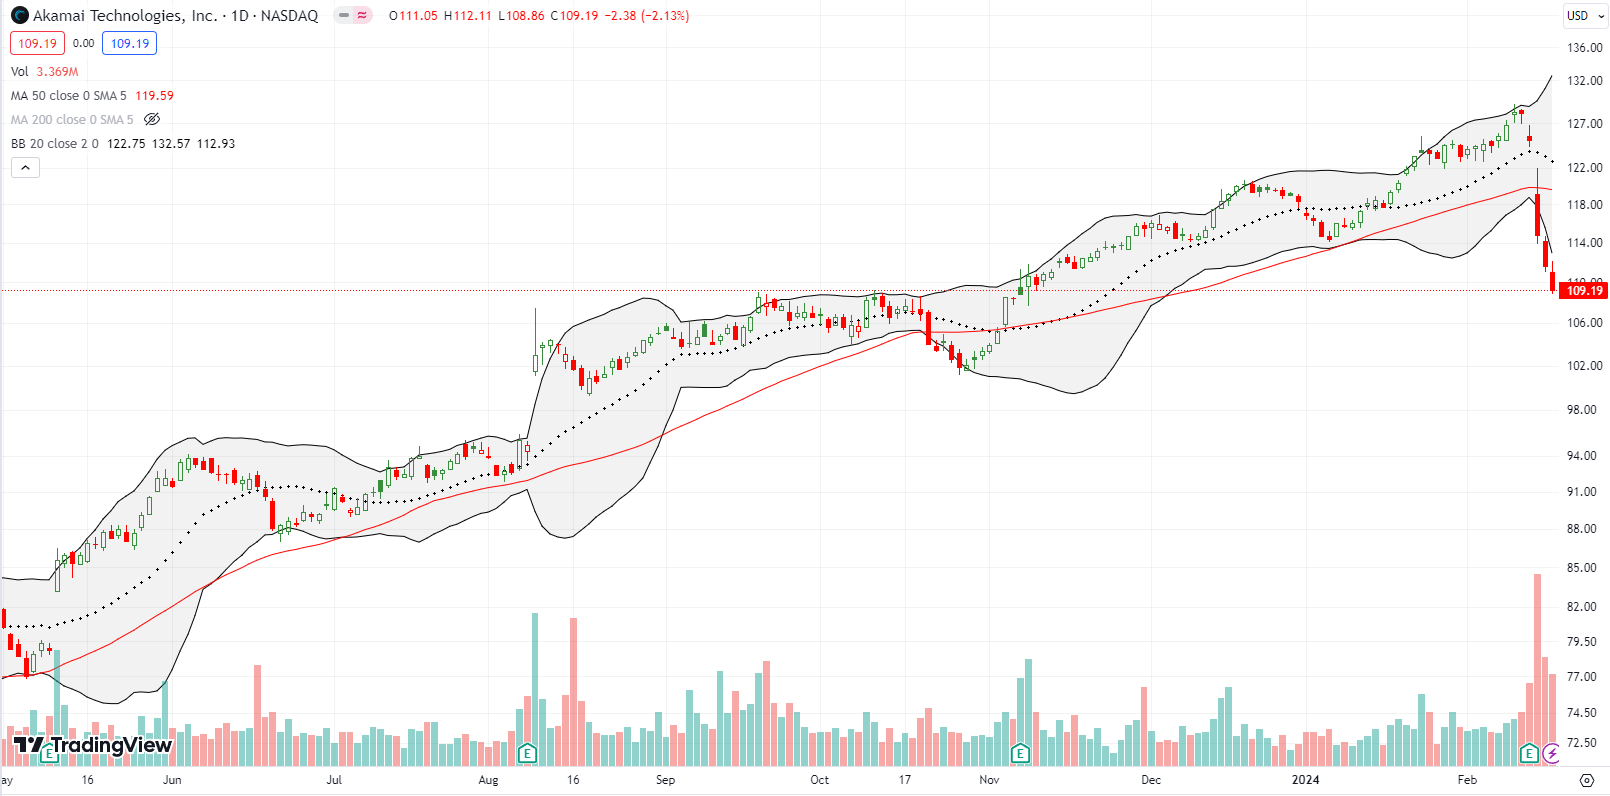 Akamai Technologies, Inc (AKAM) broke down below 50DMA support with an 8.2% post-earnings loss. AKAM closed the week at a 3-month low.